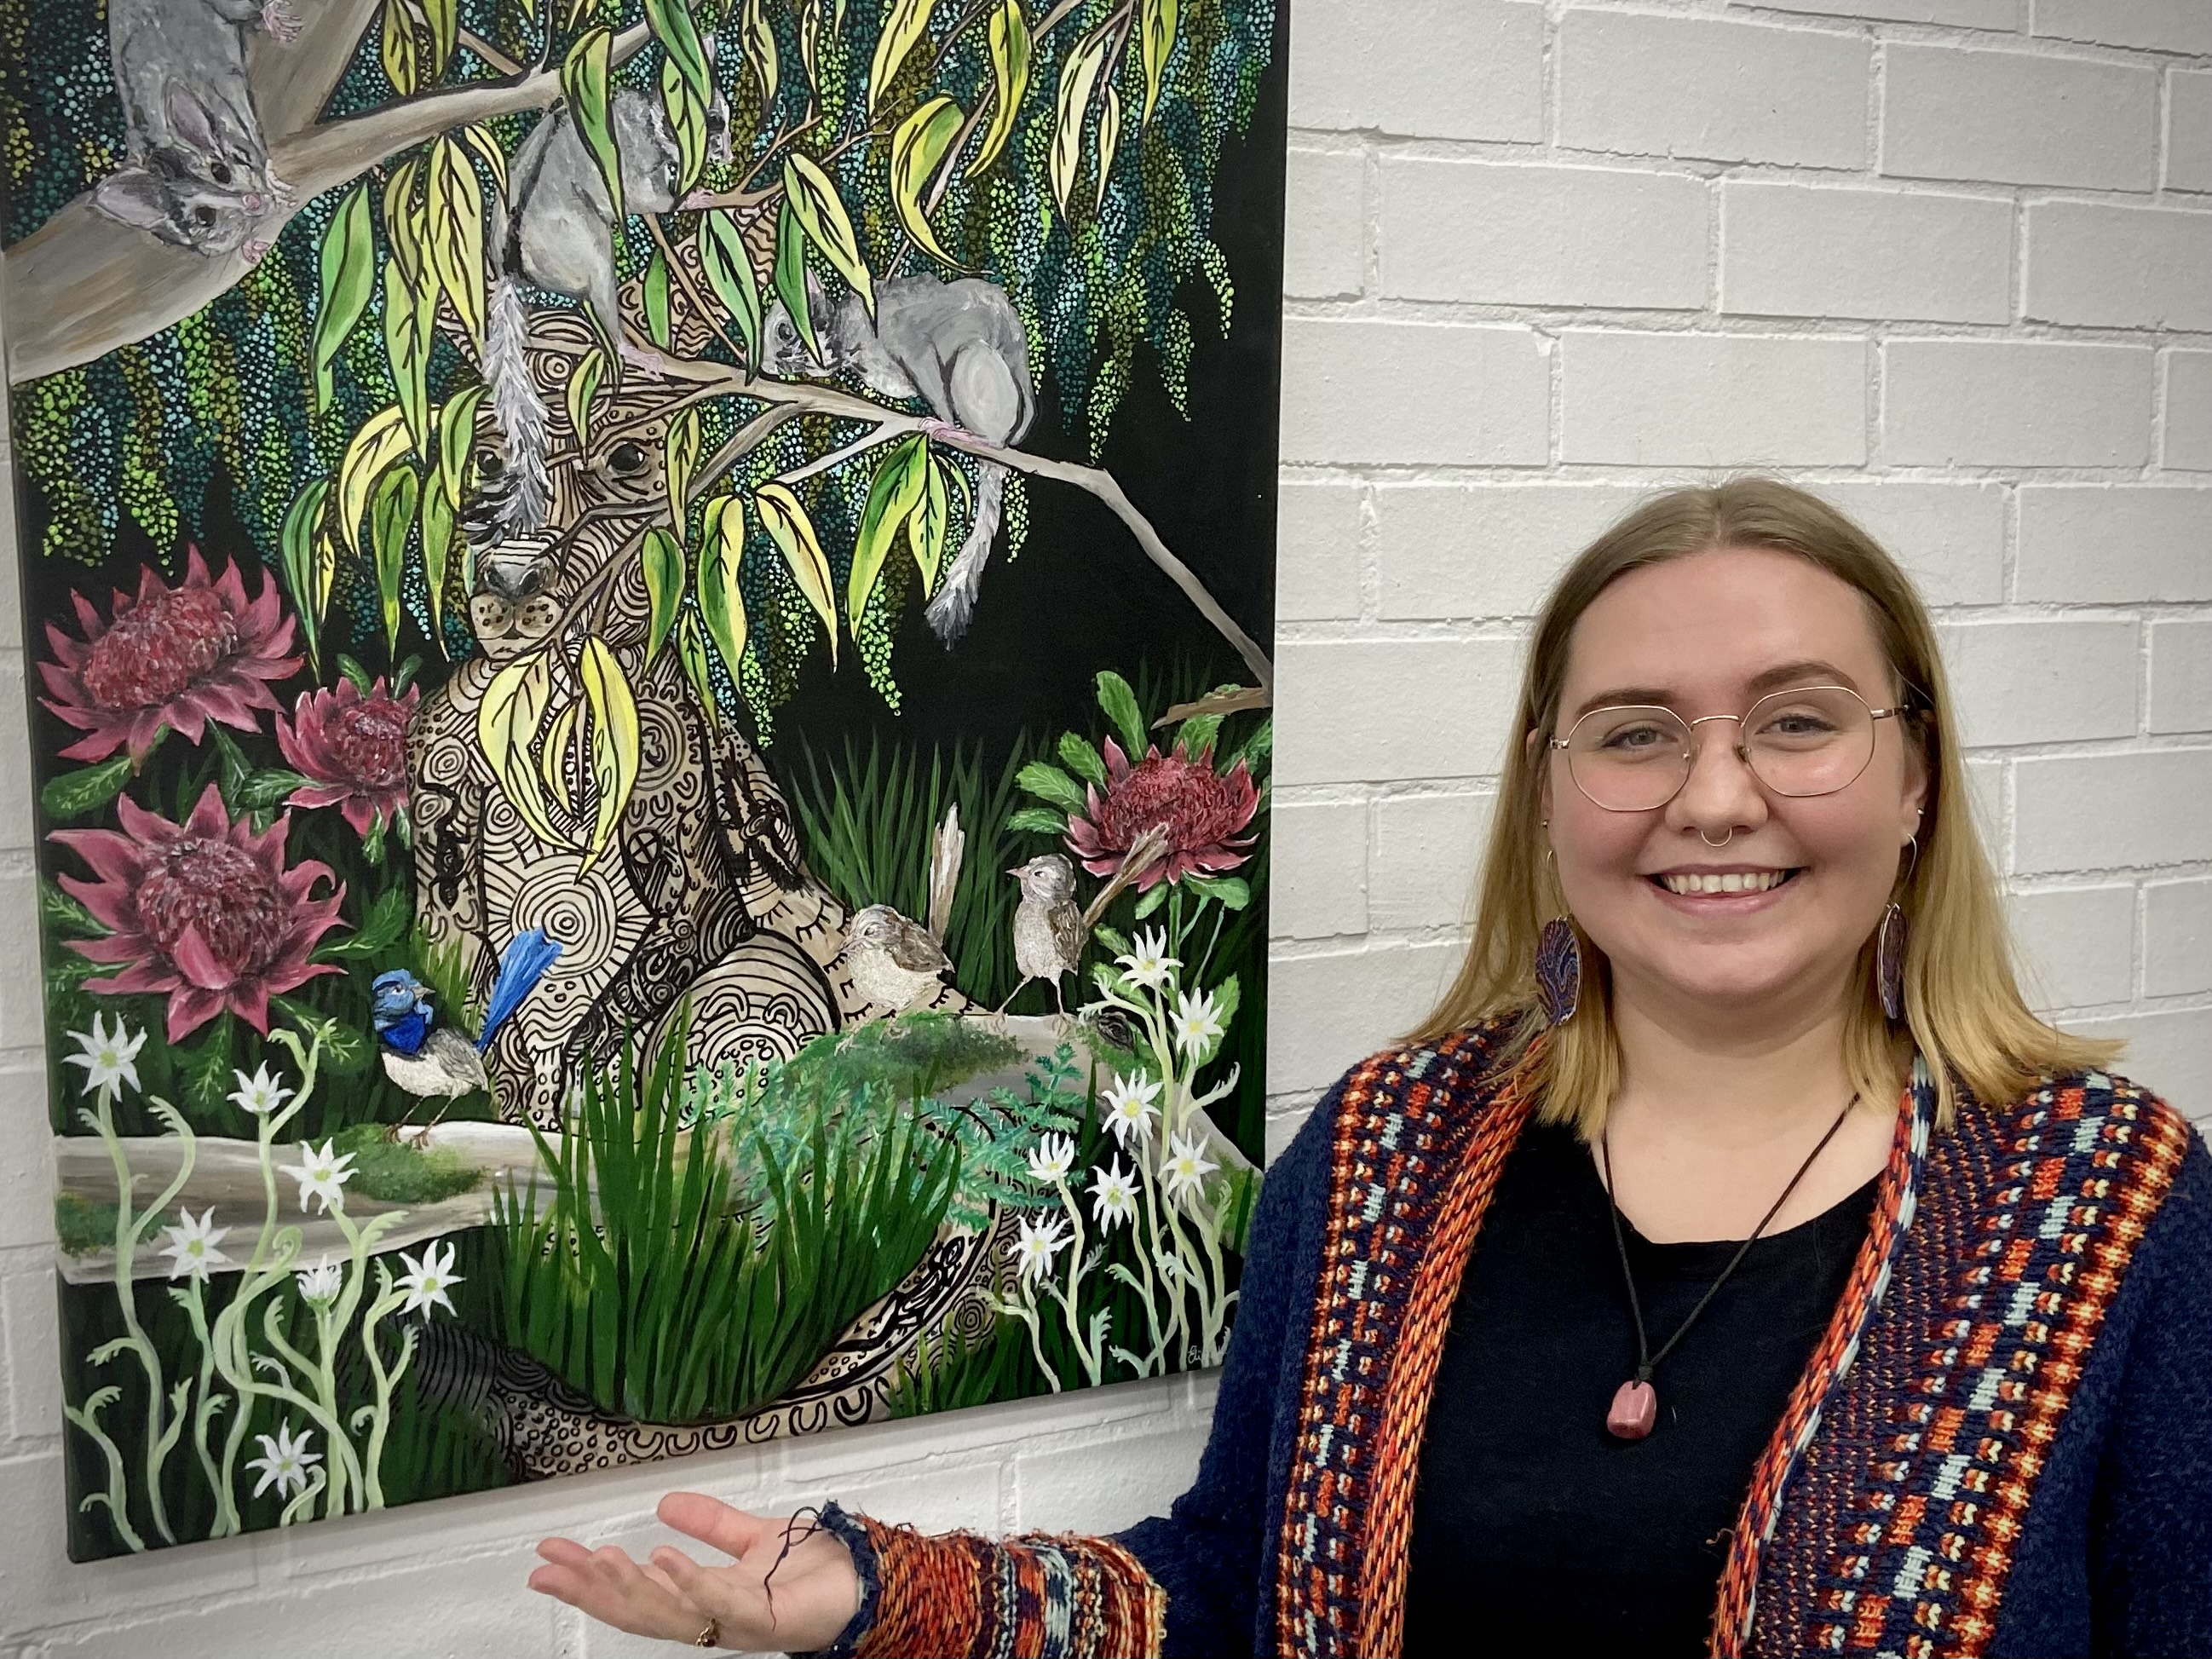 Wiradjuri artist Elizabeth Doherty with her painting at the Curious Rabbit in Wagga Wagga